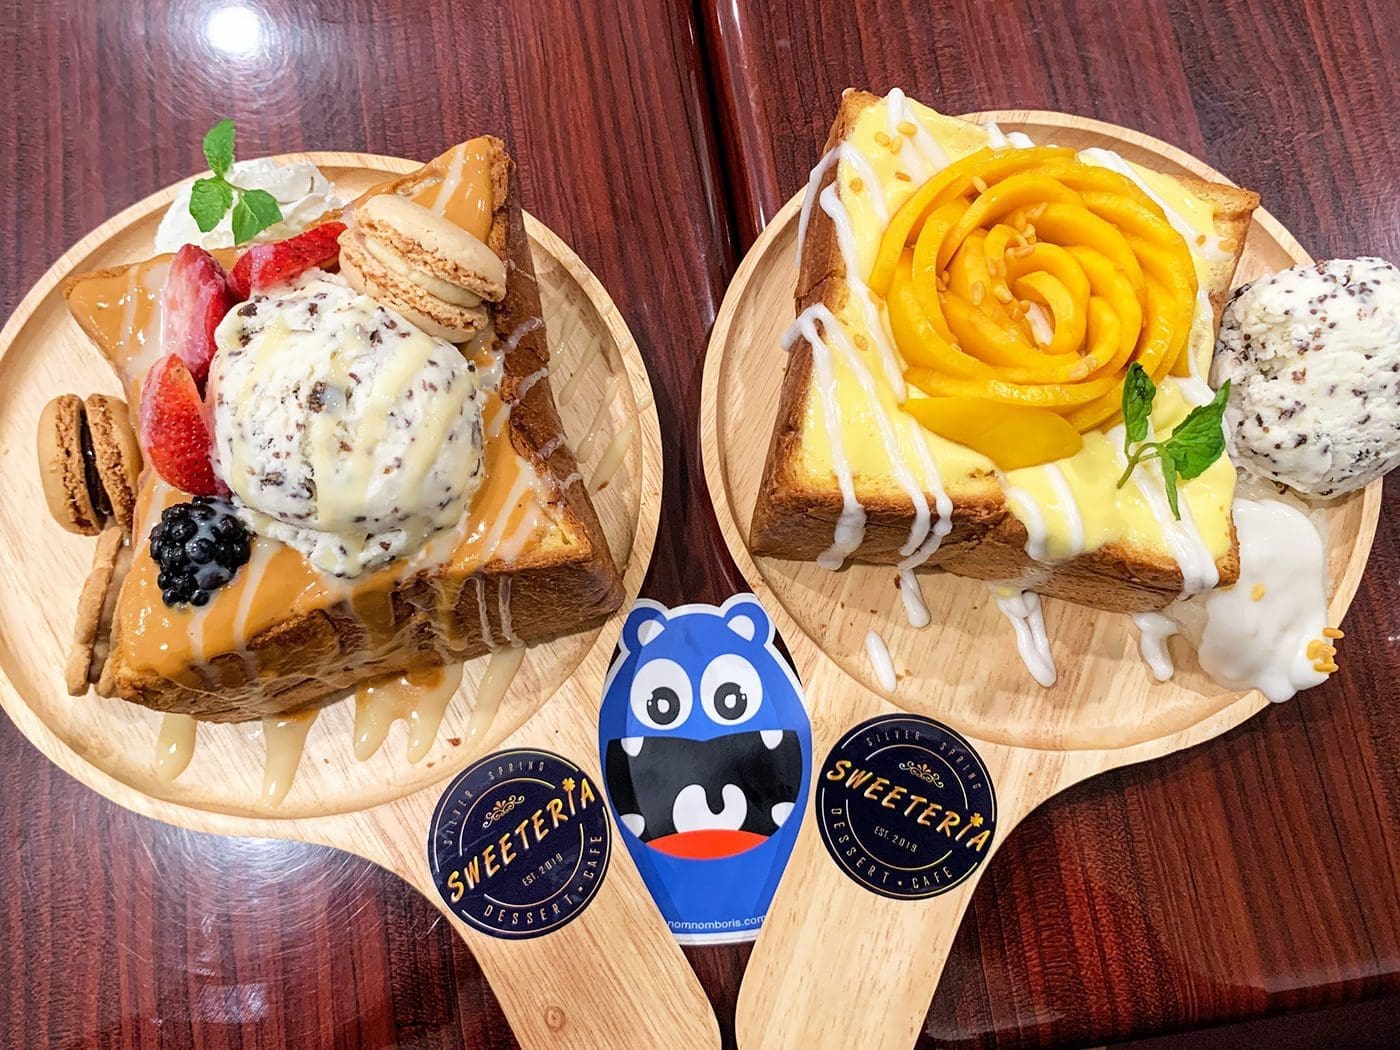 Thai Toast Desserts from Sweeteria in Downtown Silver Spring Maryland